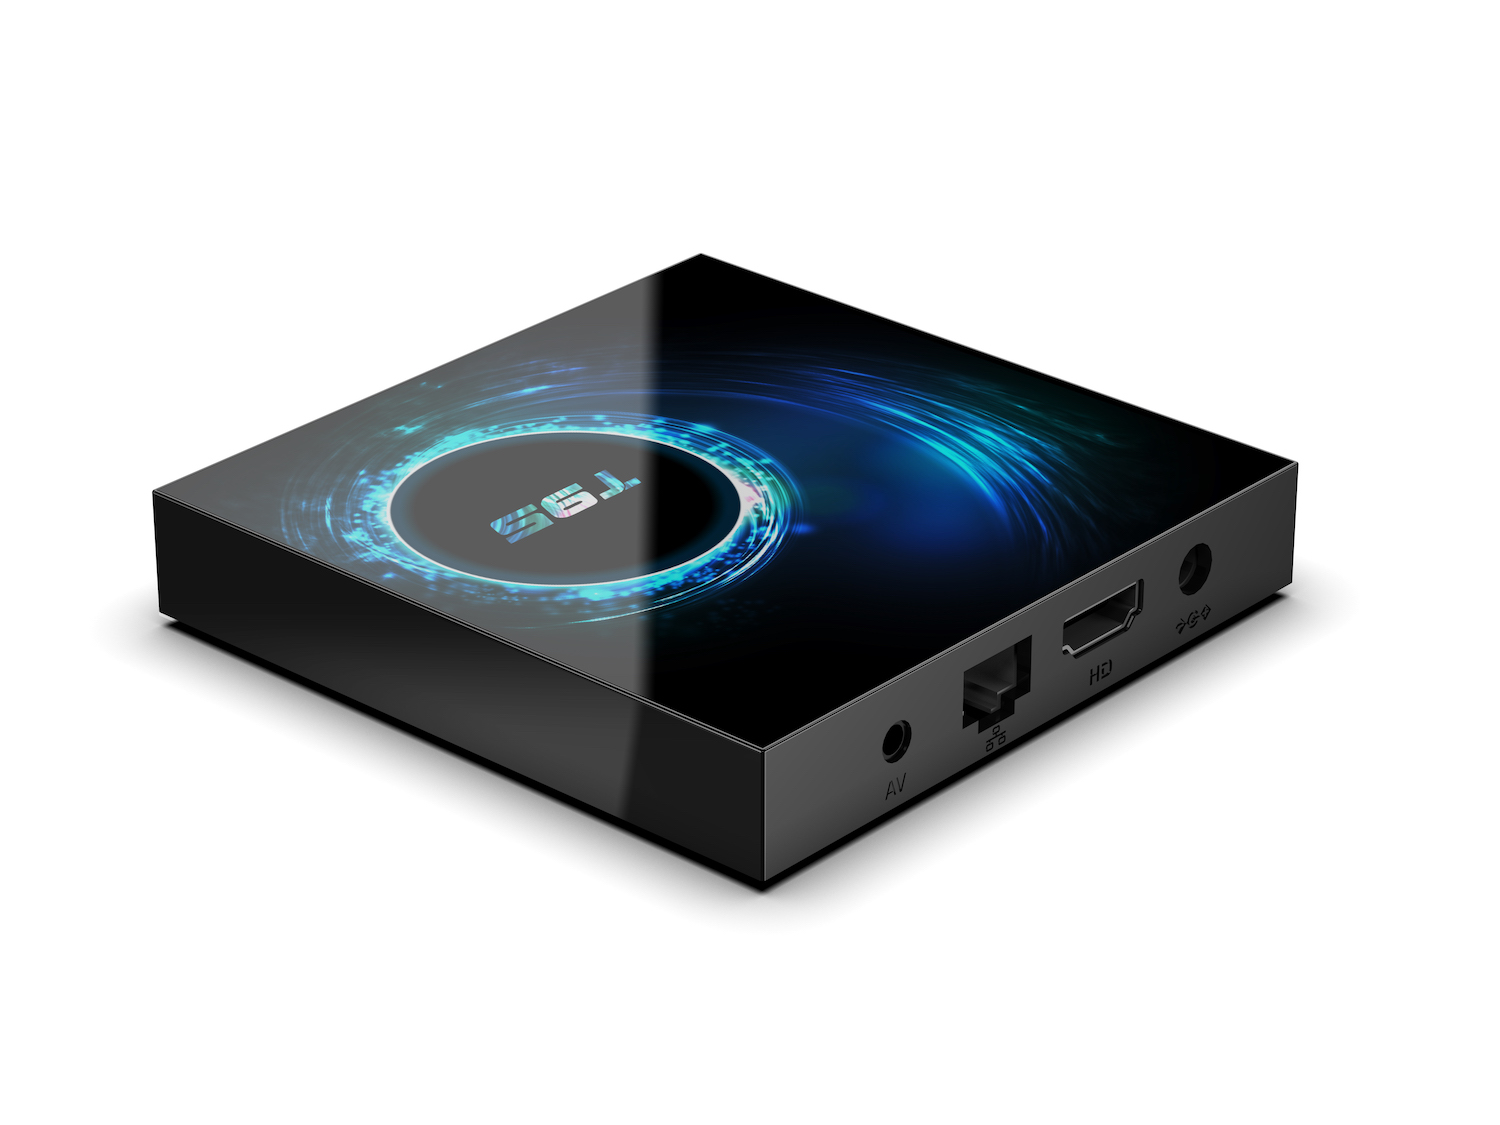 Regularity together Rally Android 10 T95 H616 6K TV box | Shenzhen JersTech Limited